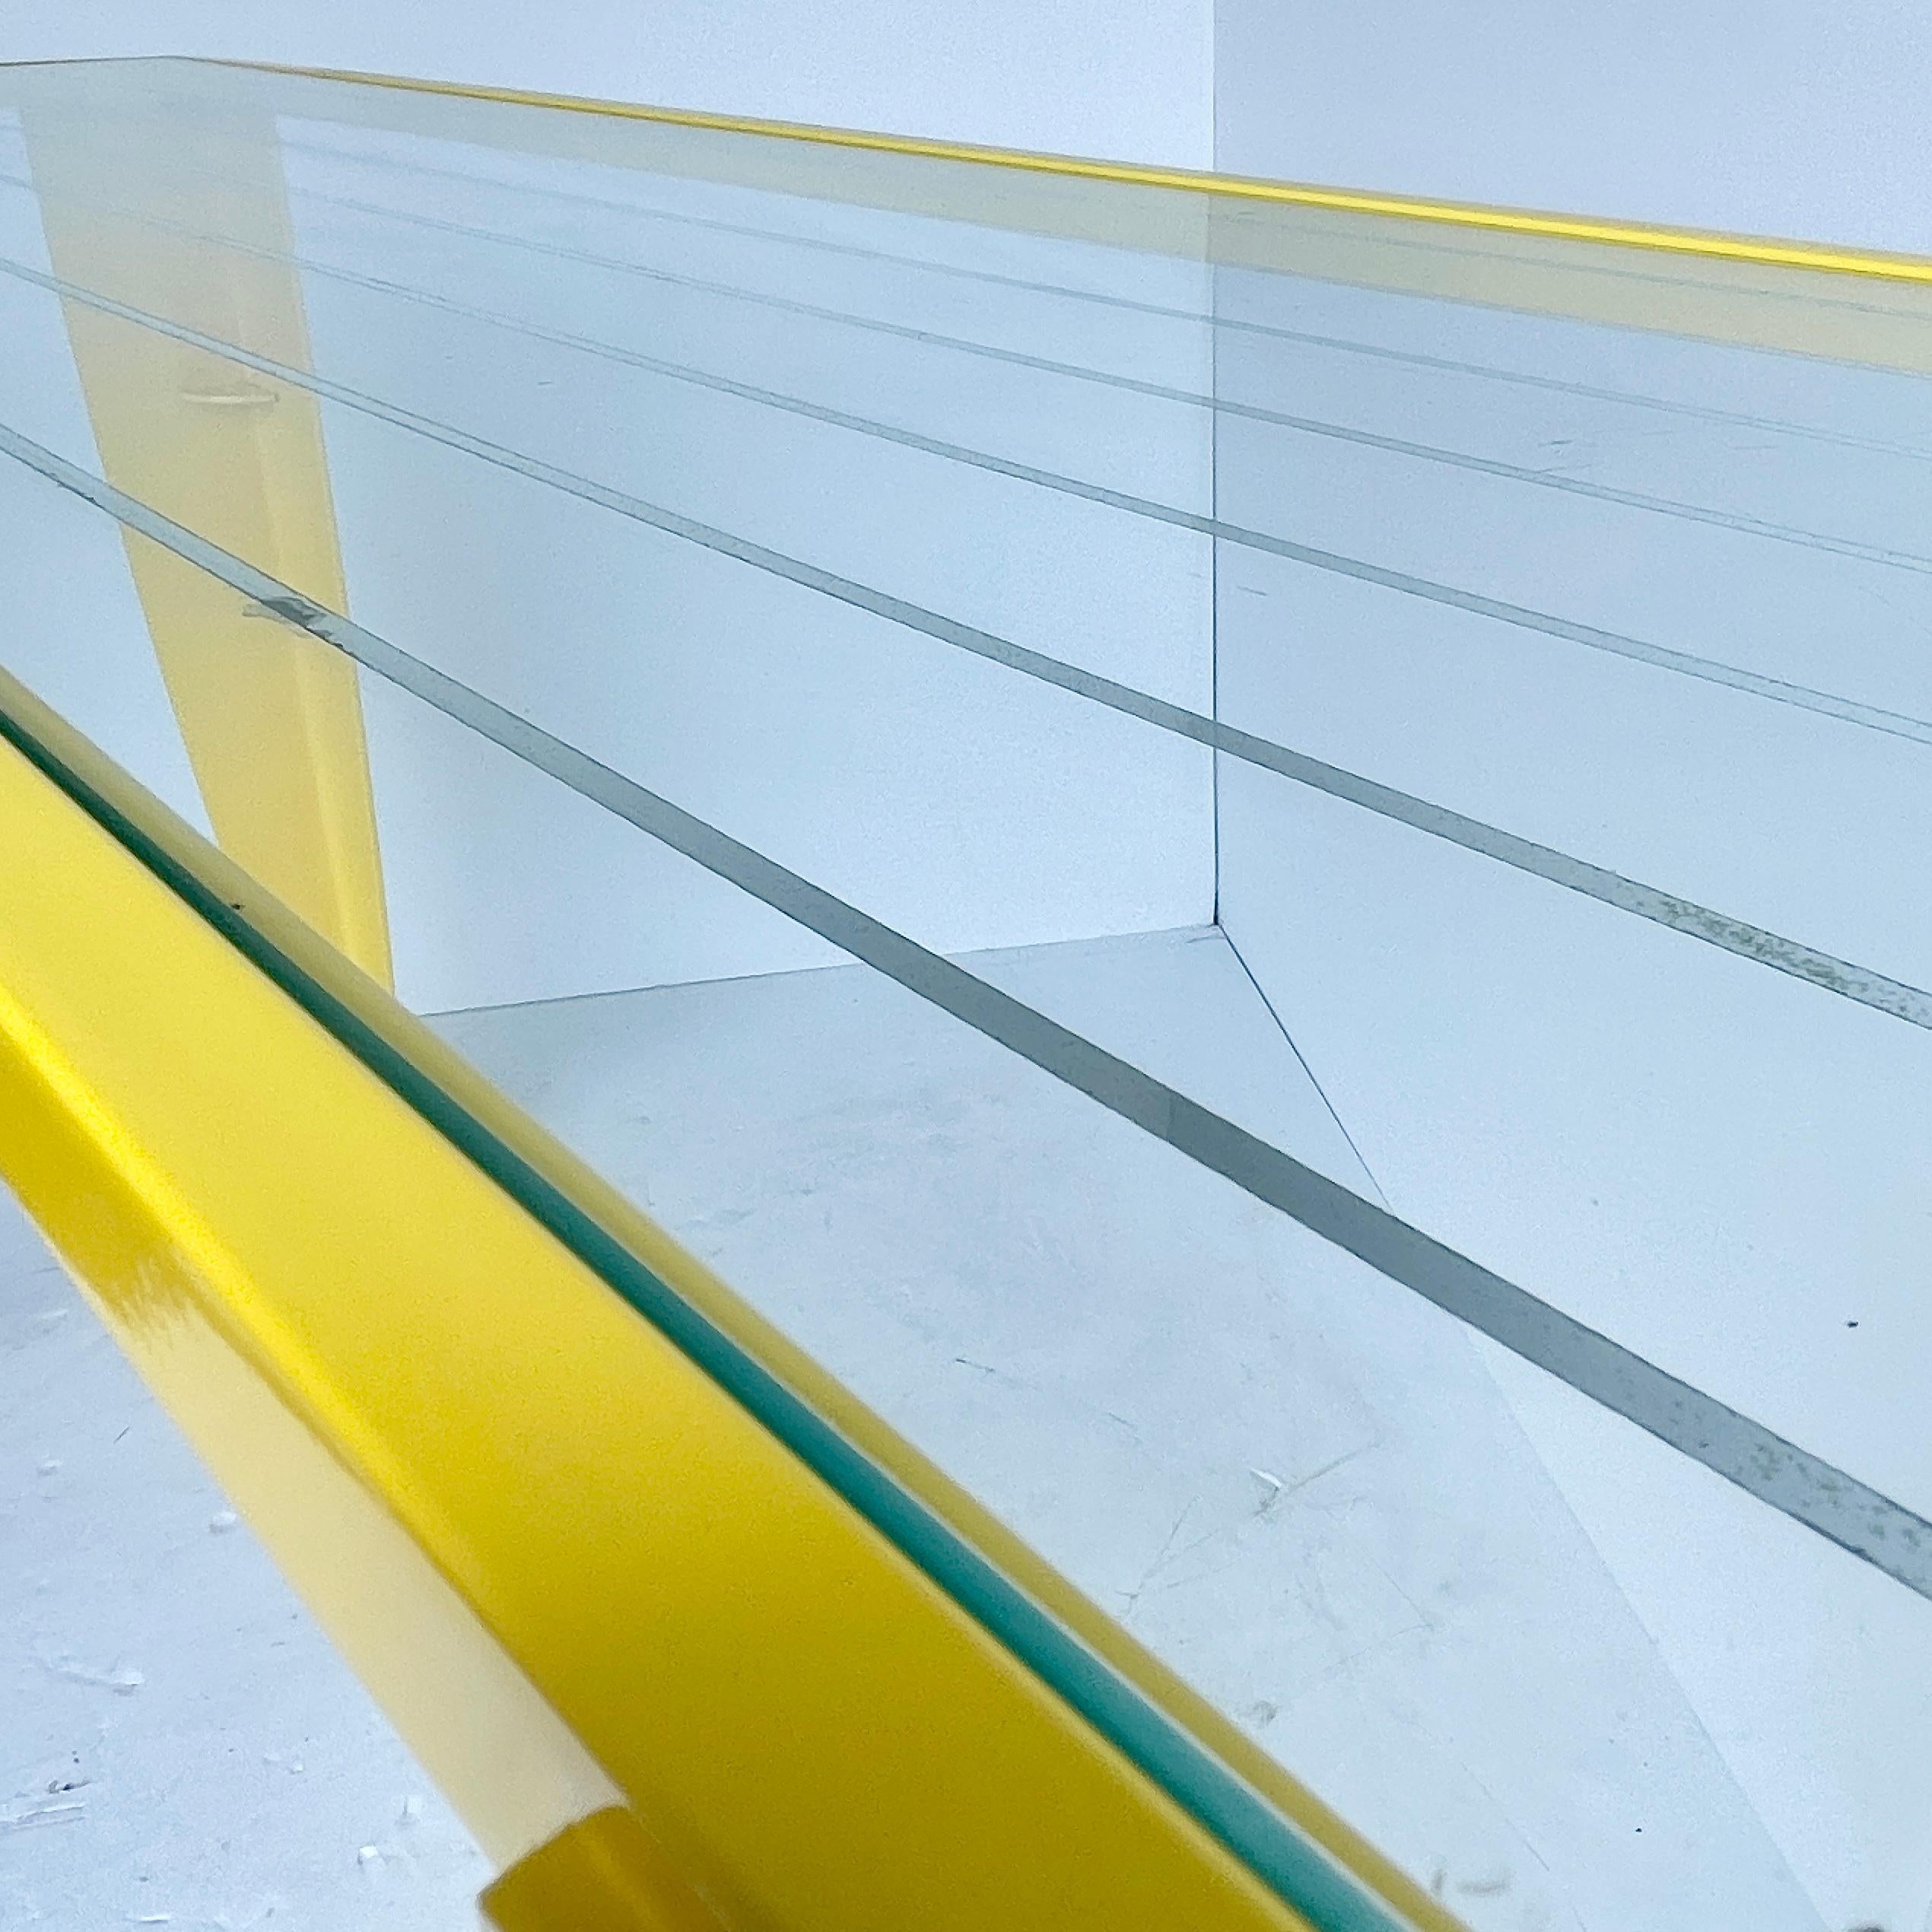 Hand-Crafted Italian Console Table with Glass Top, Powder Coated Yellow, Mid-Century Modern